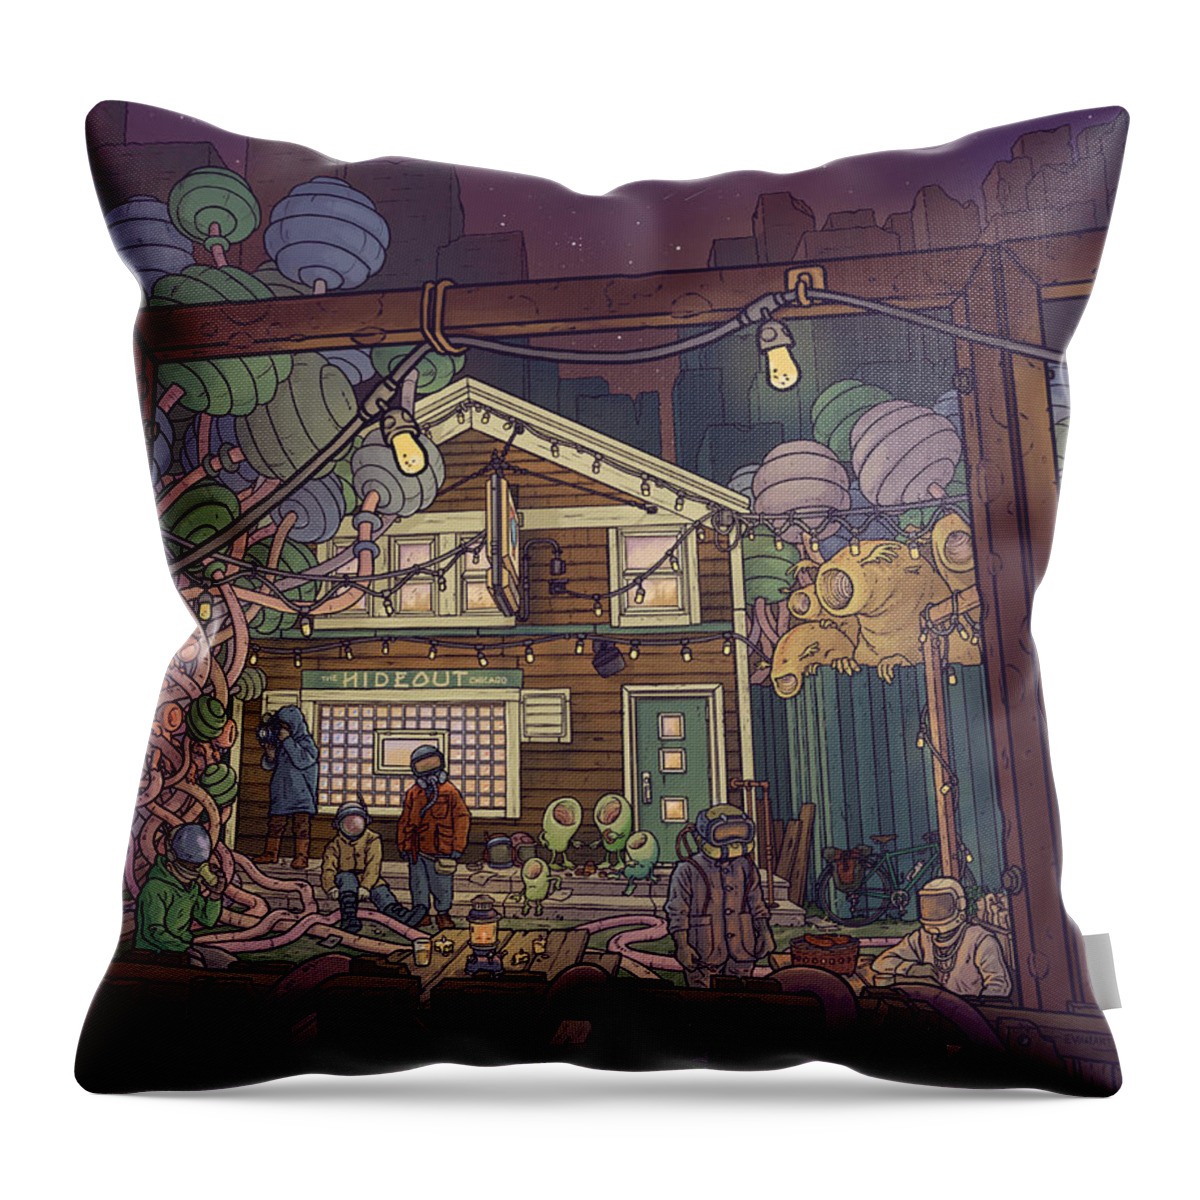 Chicago Throw Pillow featuring the digital art The Hideout by EvanArt - Evan Miller